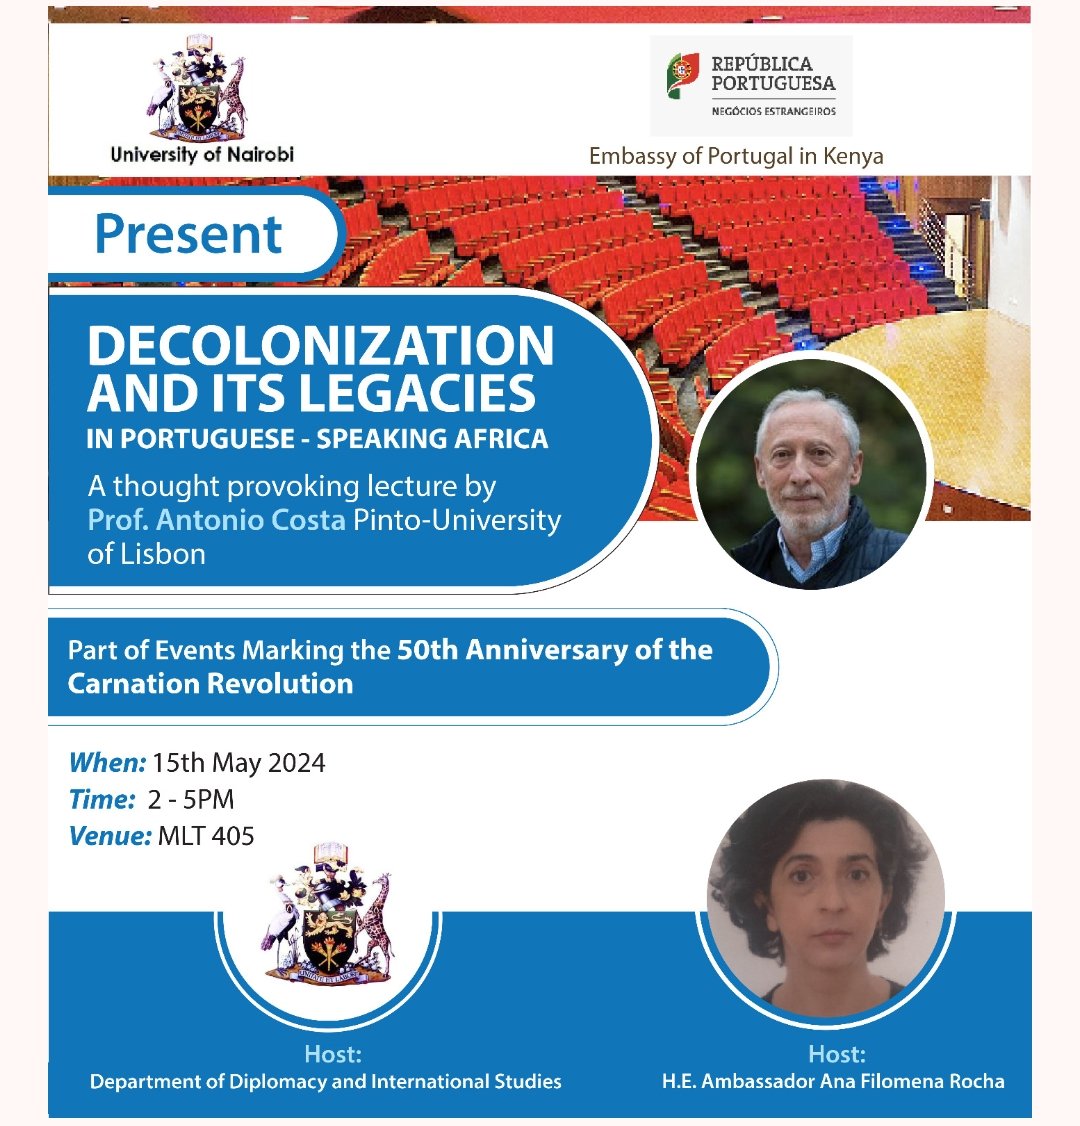 This year marks the 50th anniversary of Portugal's Carnation Revolution, a significant event in their history celebrated as Freedom. Presented by Prof. Antonio Costa from Pinto University of Lisbon. Happening from 2.00-5.00pm at @uonbi Towers, fourth floor 405.@ddis_uon